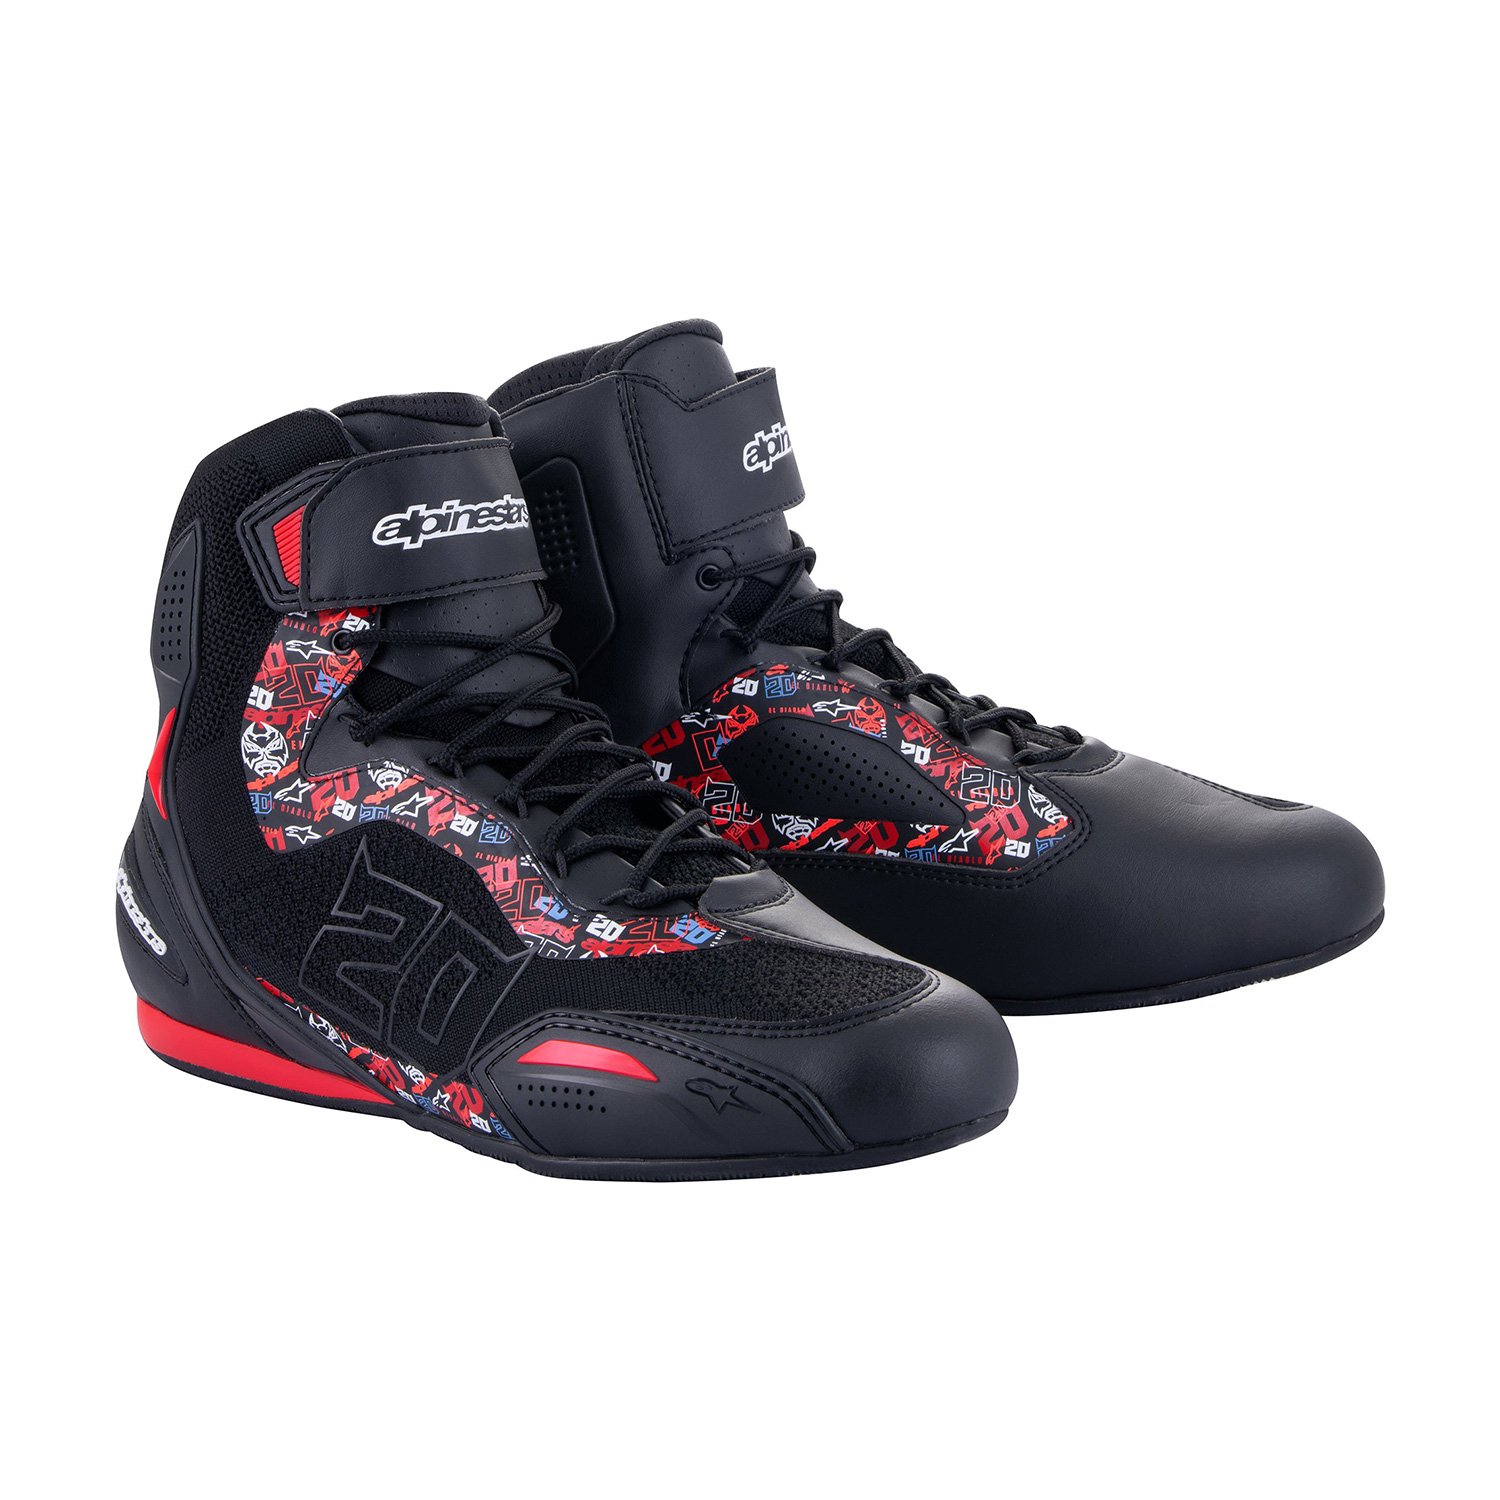 Image of EU Alpinestars FQ20 Faster-3 Rideknit Noir Bright Rouge Chaussures Taille US 10